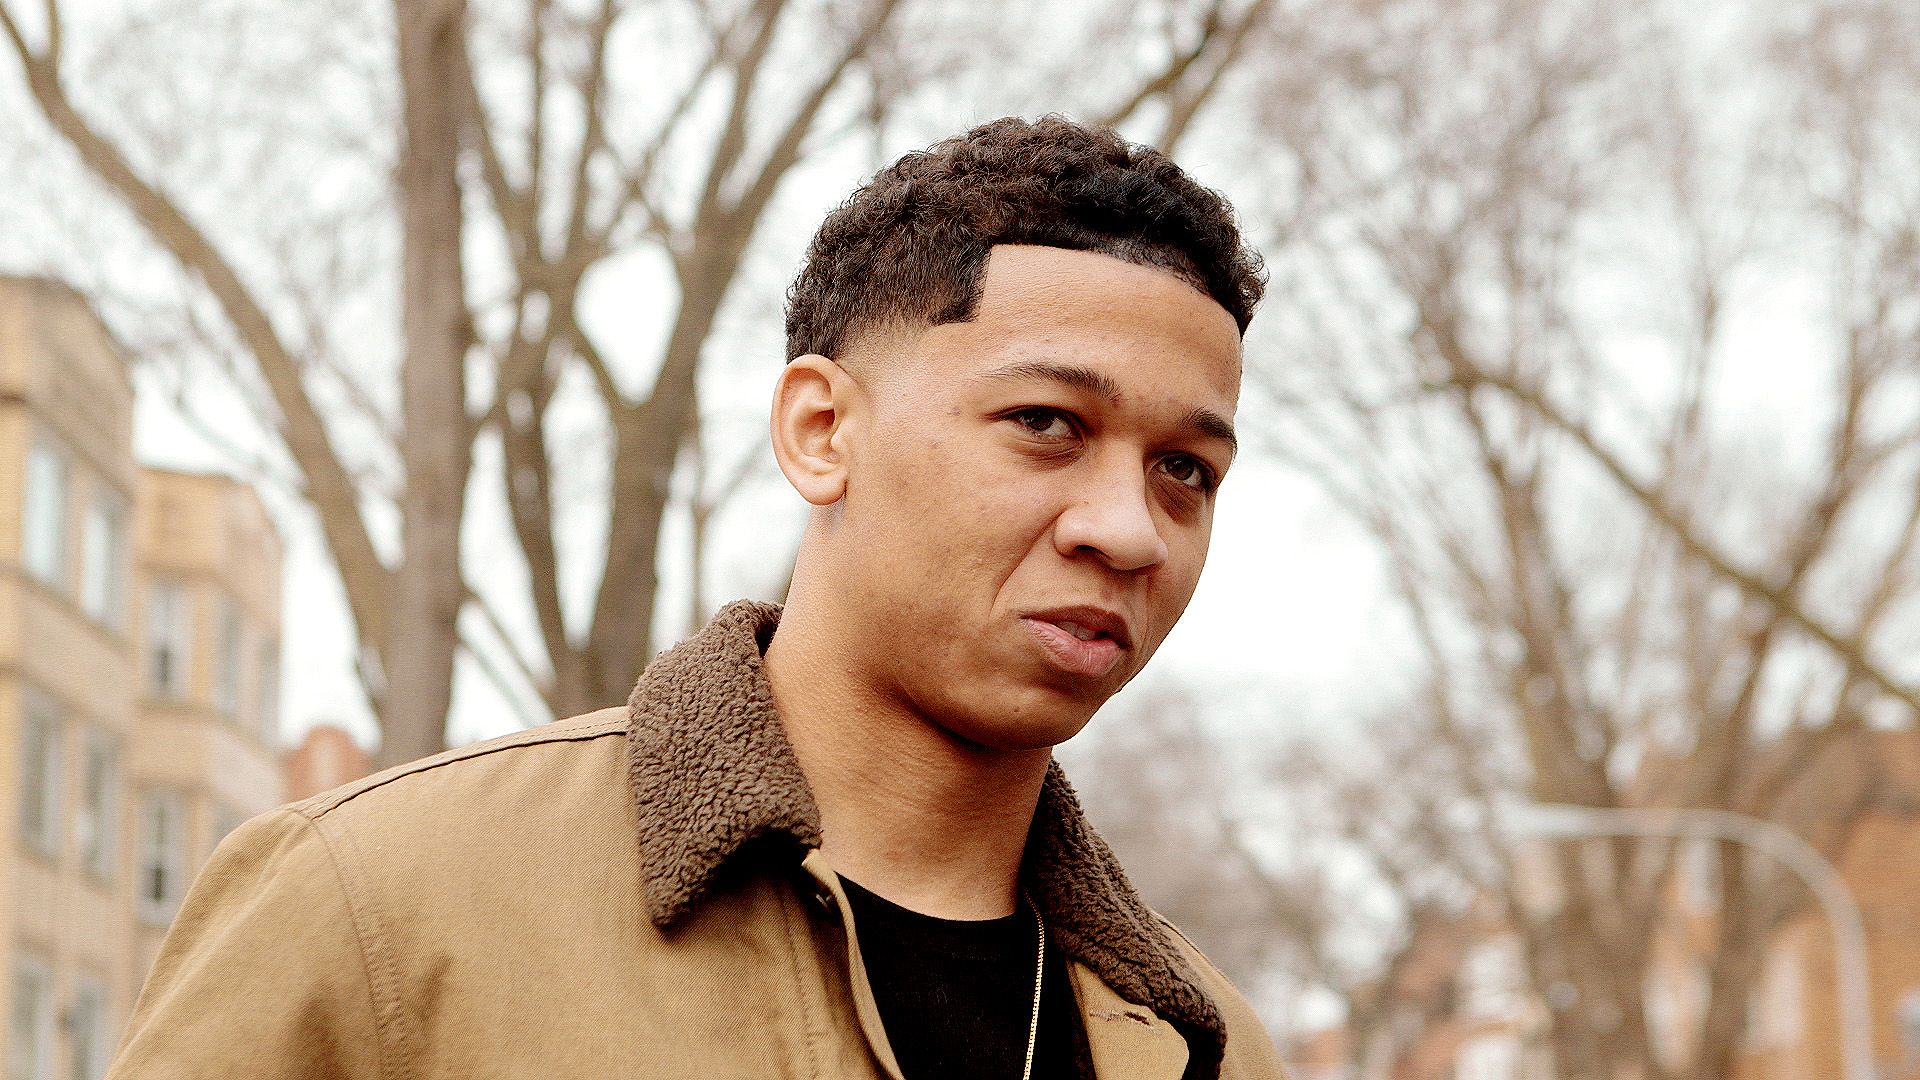 Lil Bibby Hair, Hd Wallpapers & backgrounds Download.